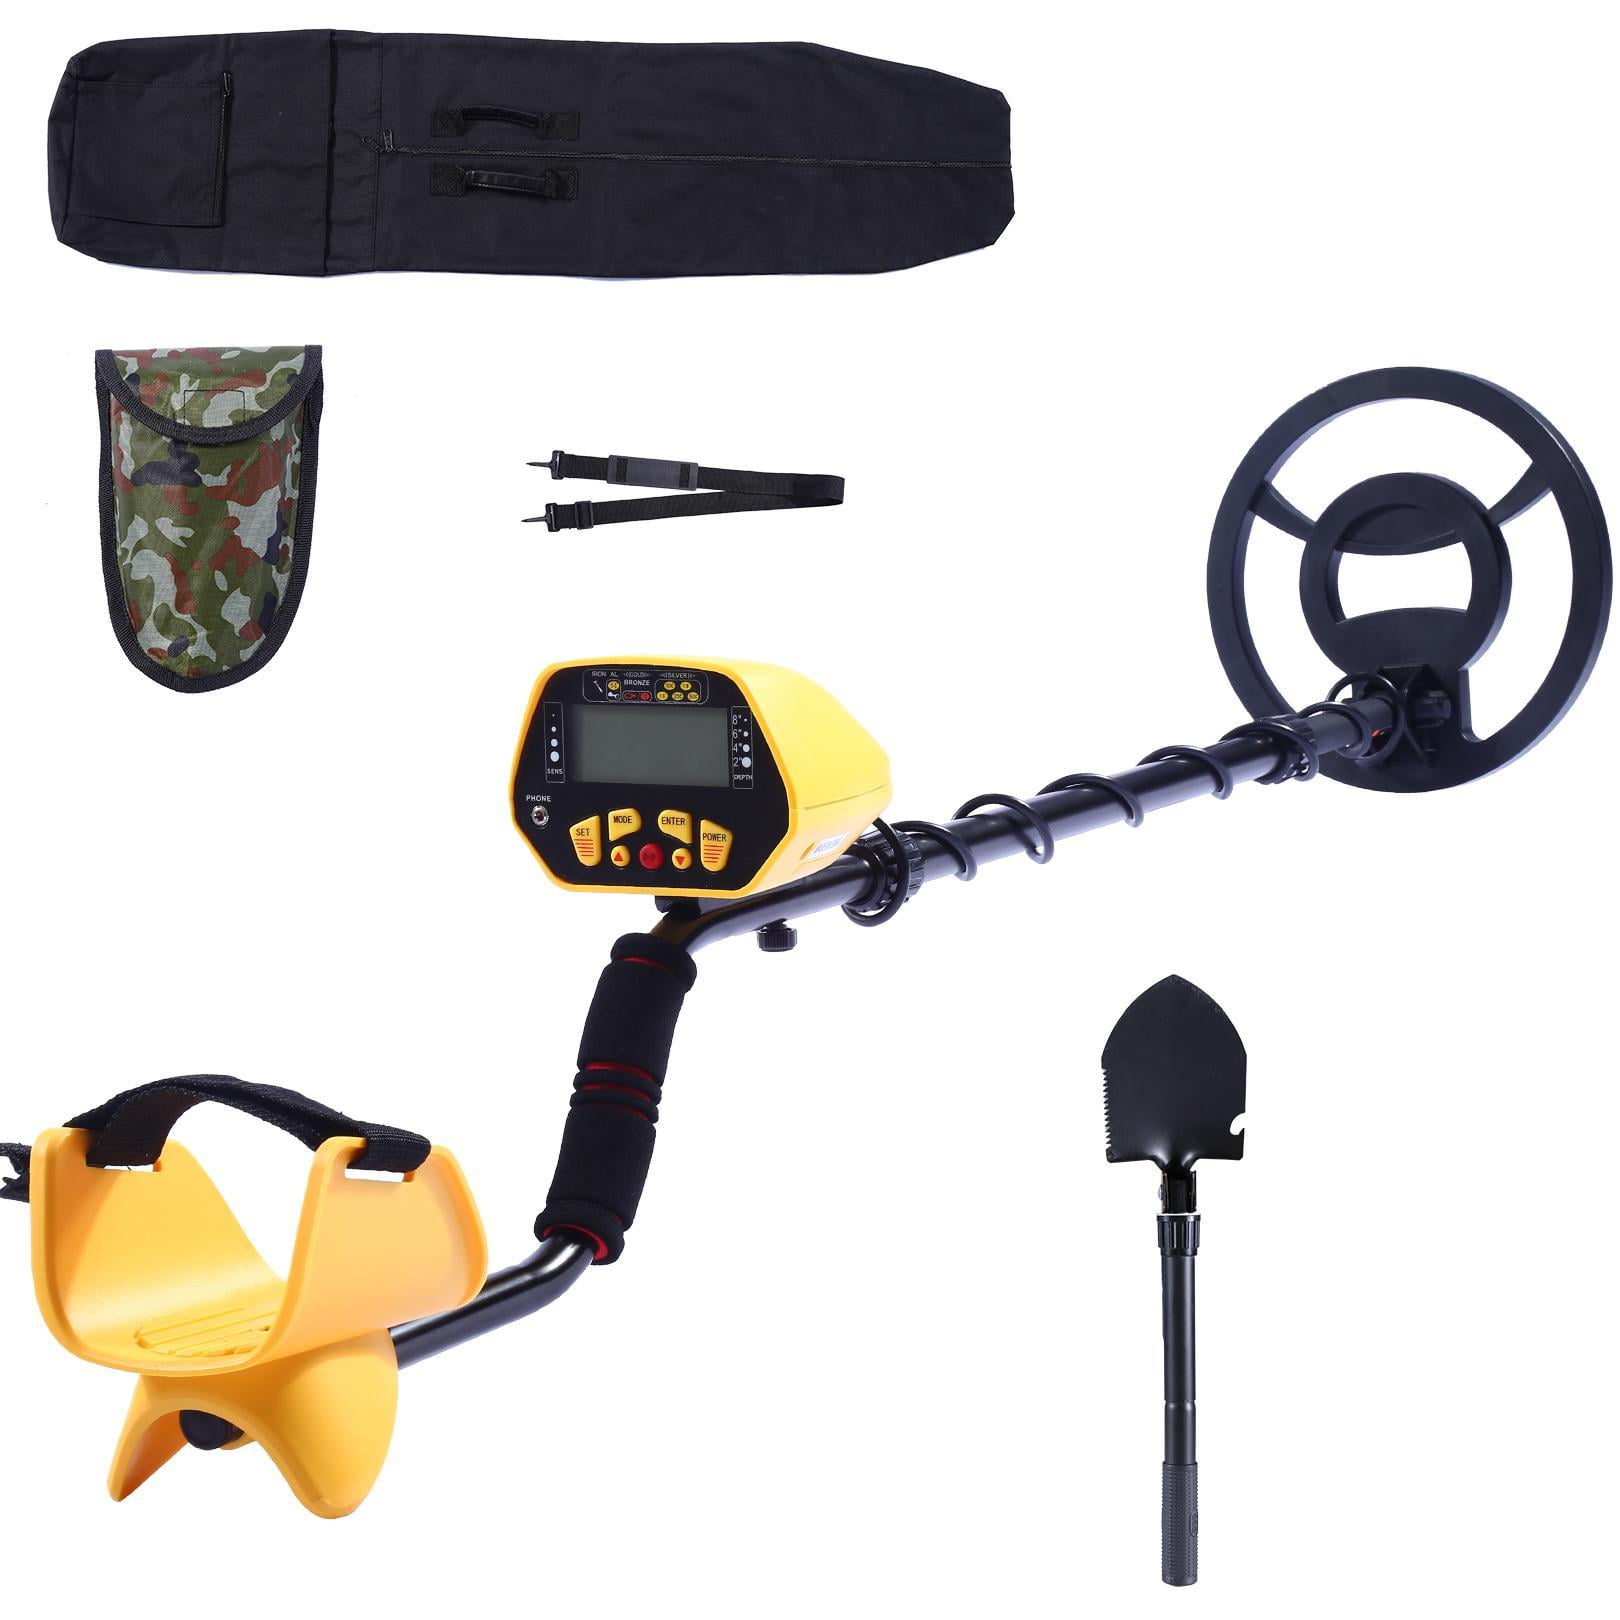 Details about   Kids Metal Detector with LCD Display for Kids Beach Yard Ground Metal Detector 